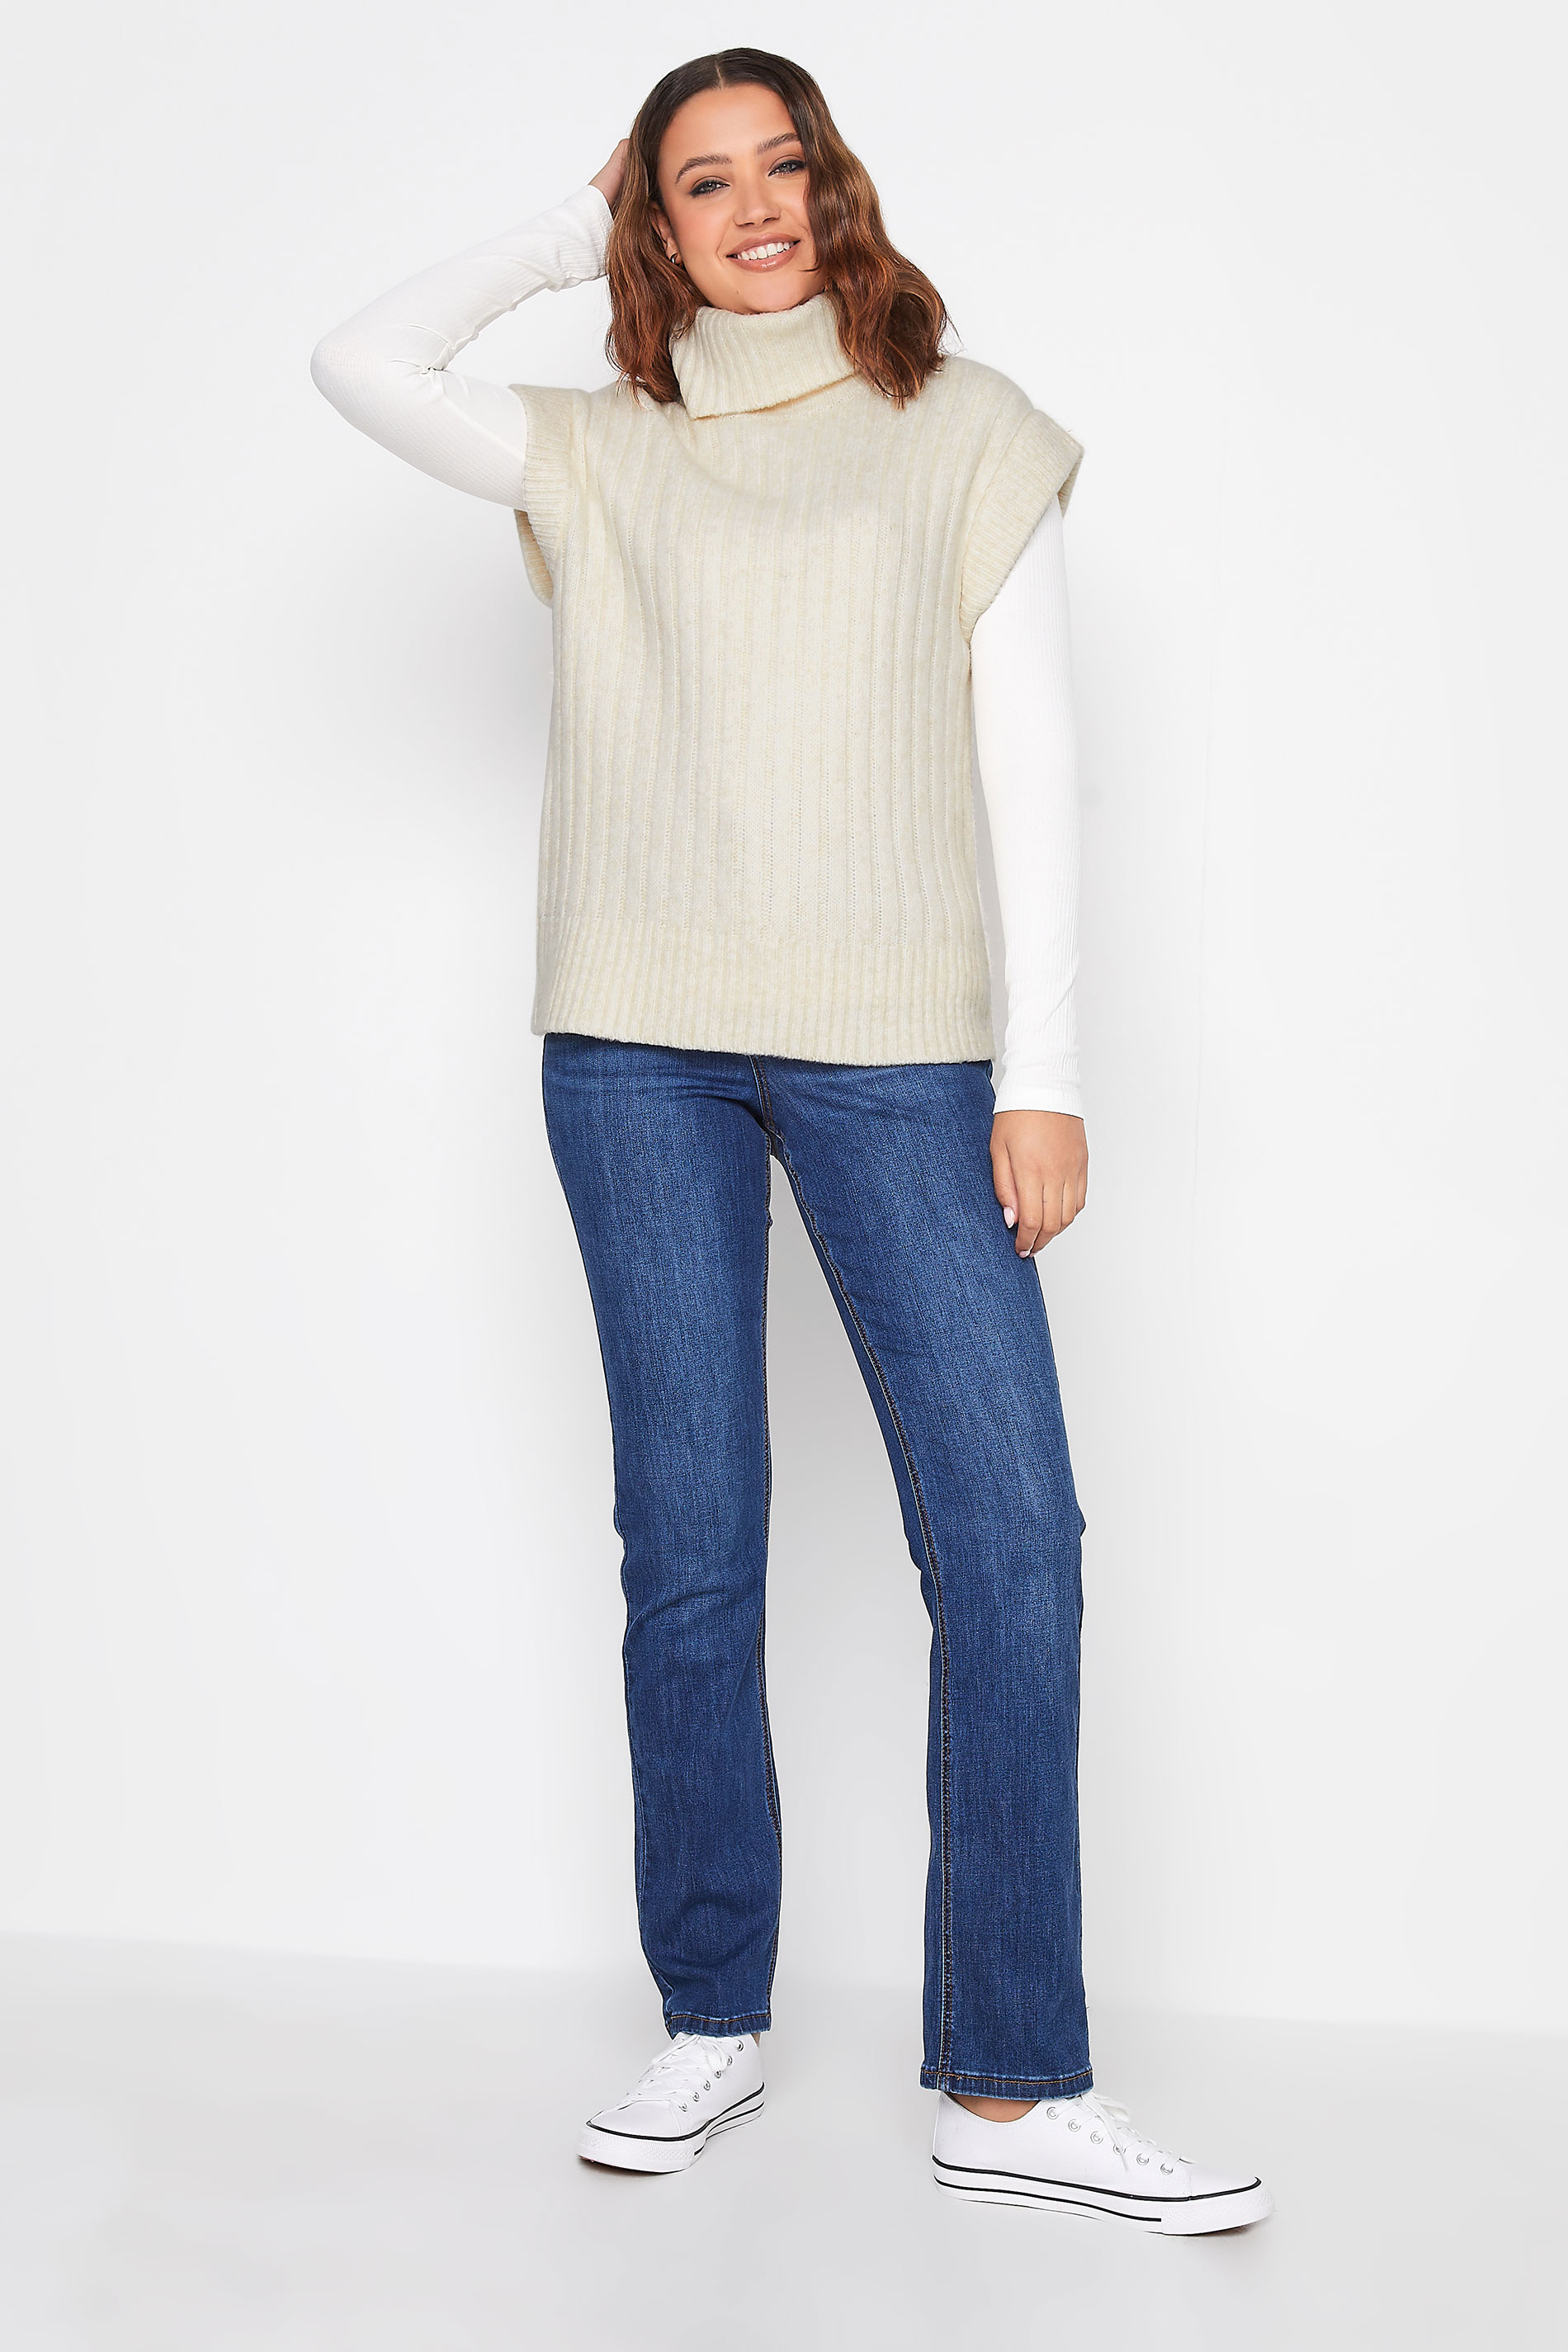 LTS Tall Ivory White Ribbed Roll Neck Knitted Sweater Vest | Long Tall Sally  2